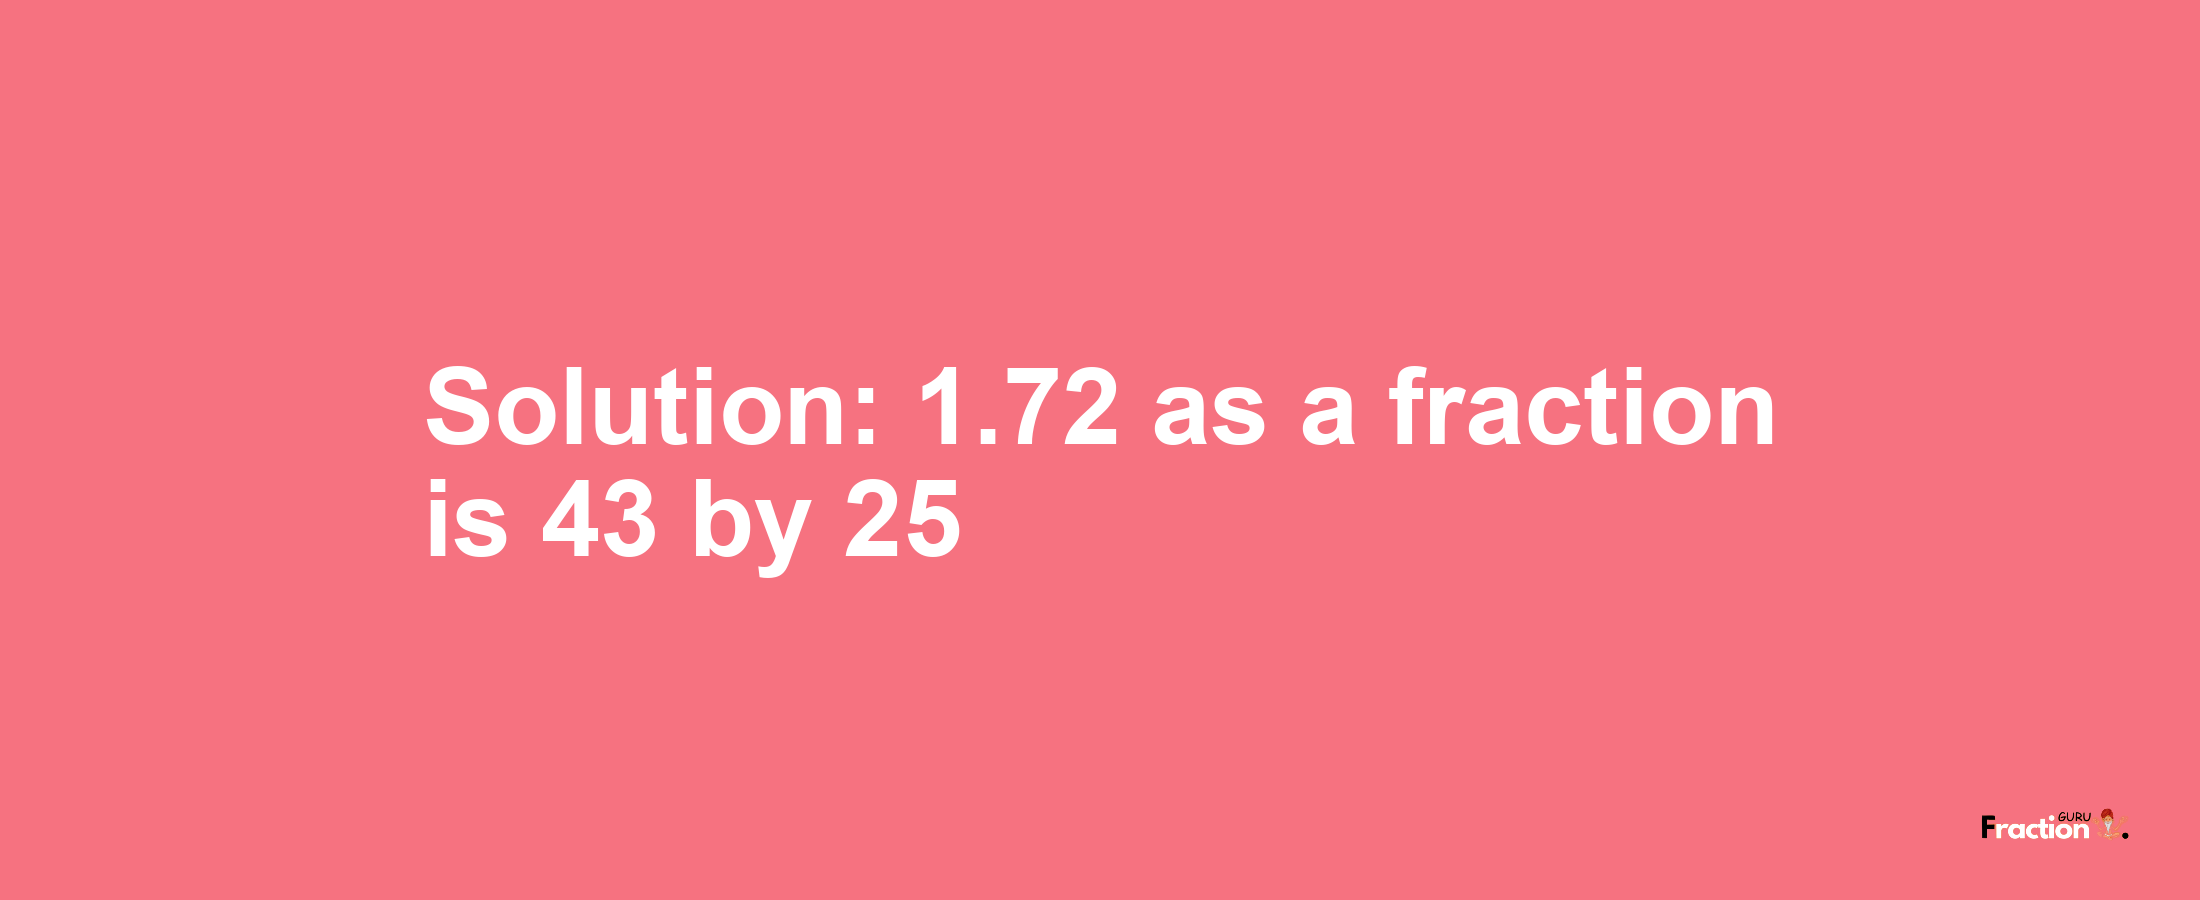 Solution:1.72 as a fraction is 43/25